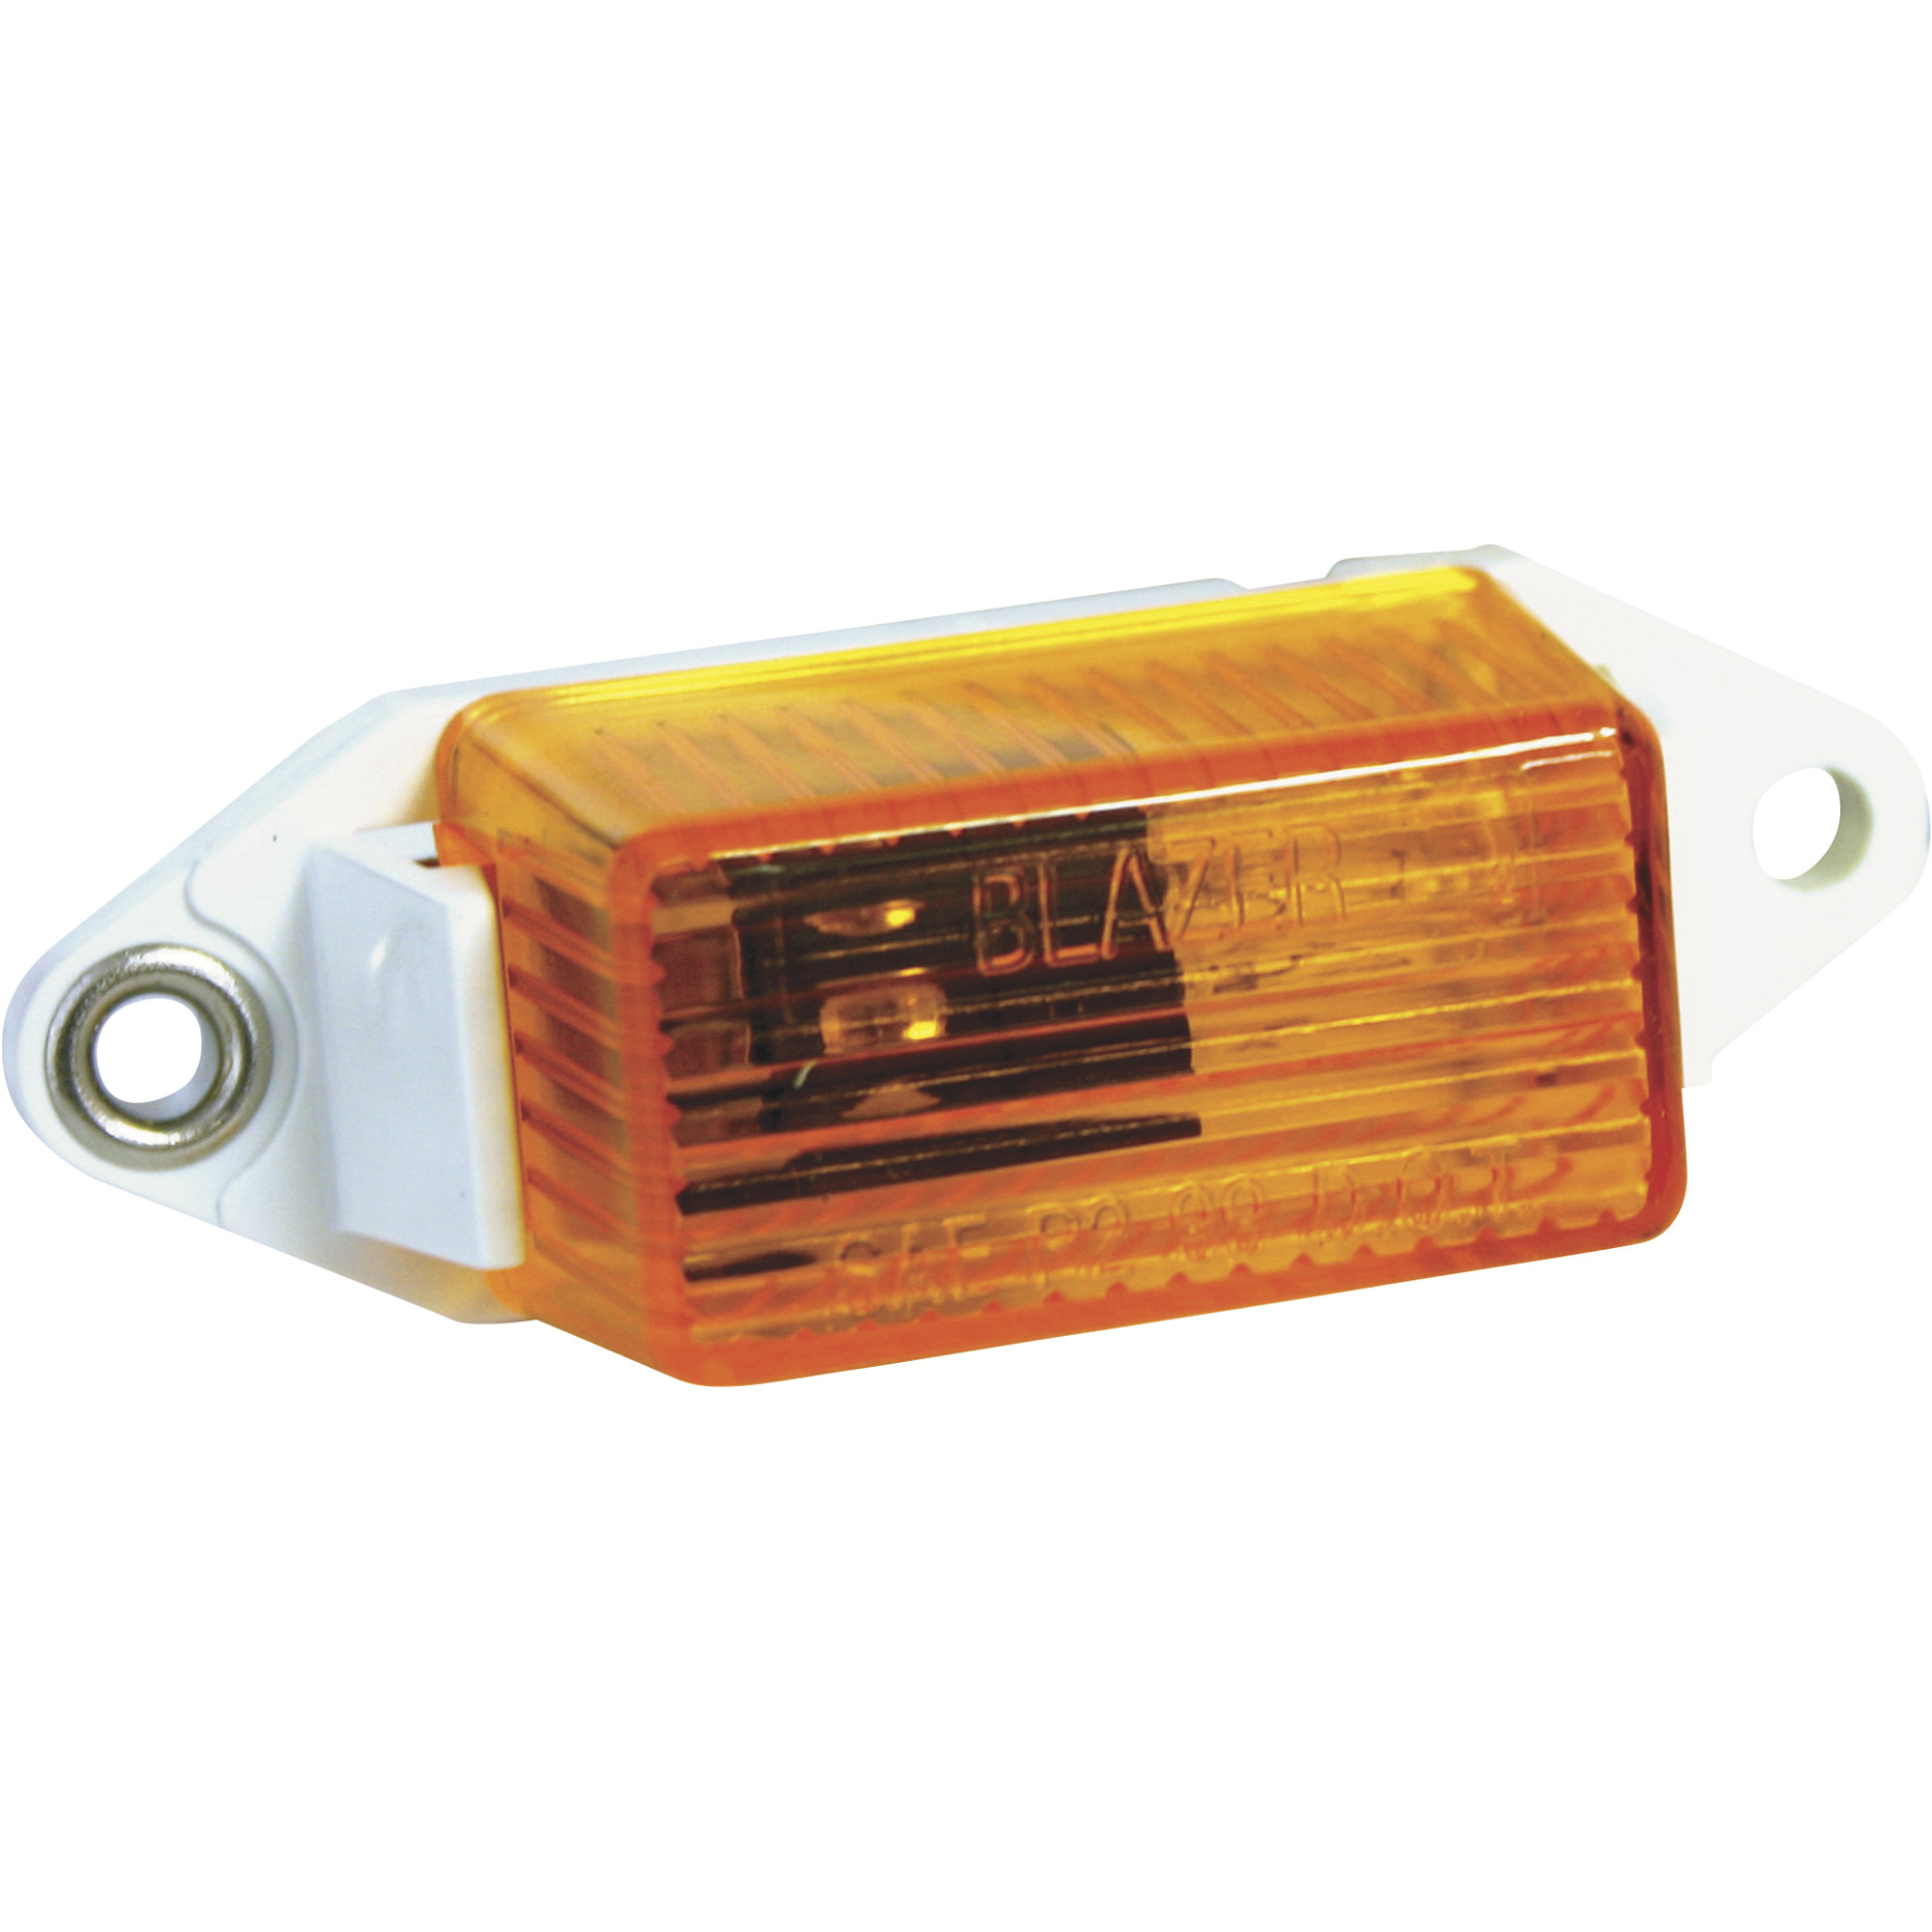 Hopkins Towing Solutions 3 3/16Inch Rectangular Clearance and Side Marker â 6-Pack, Amber, Model B486CAK